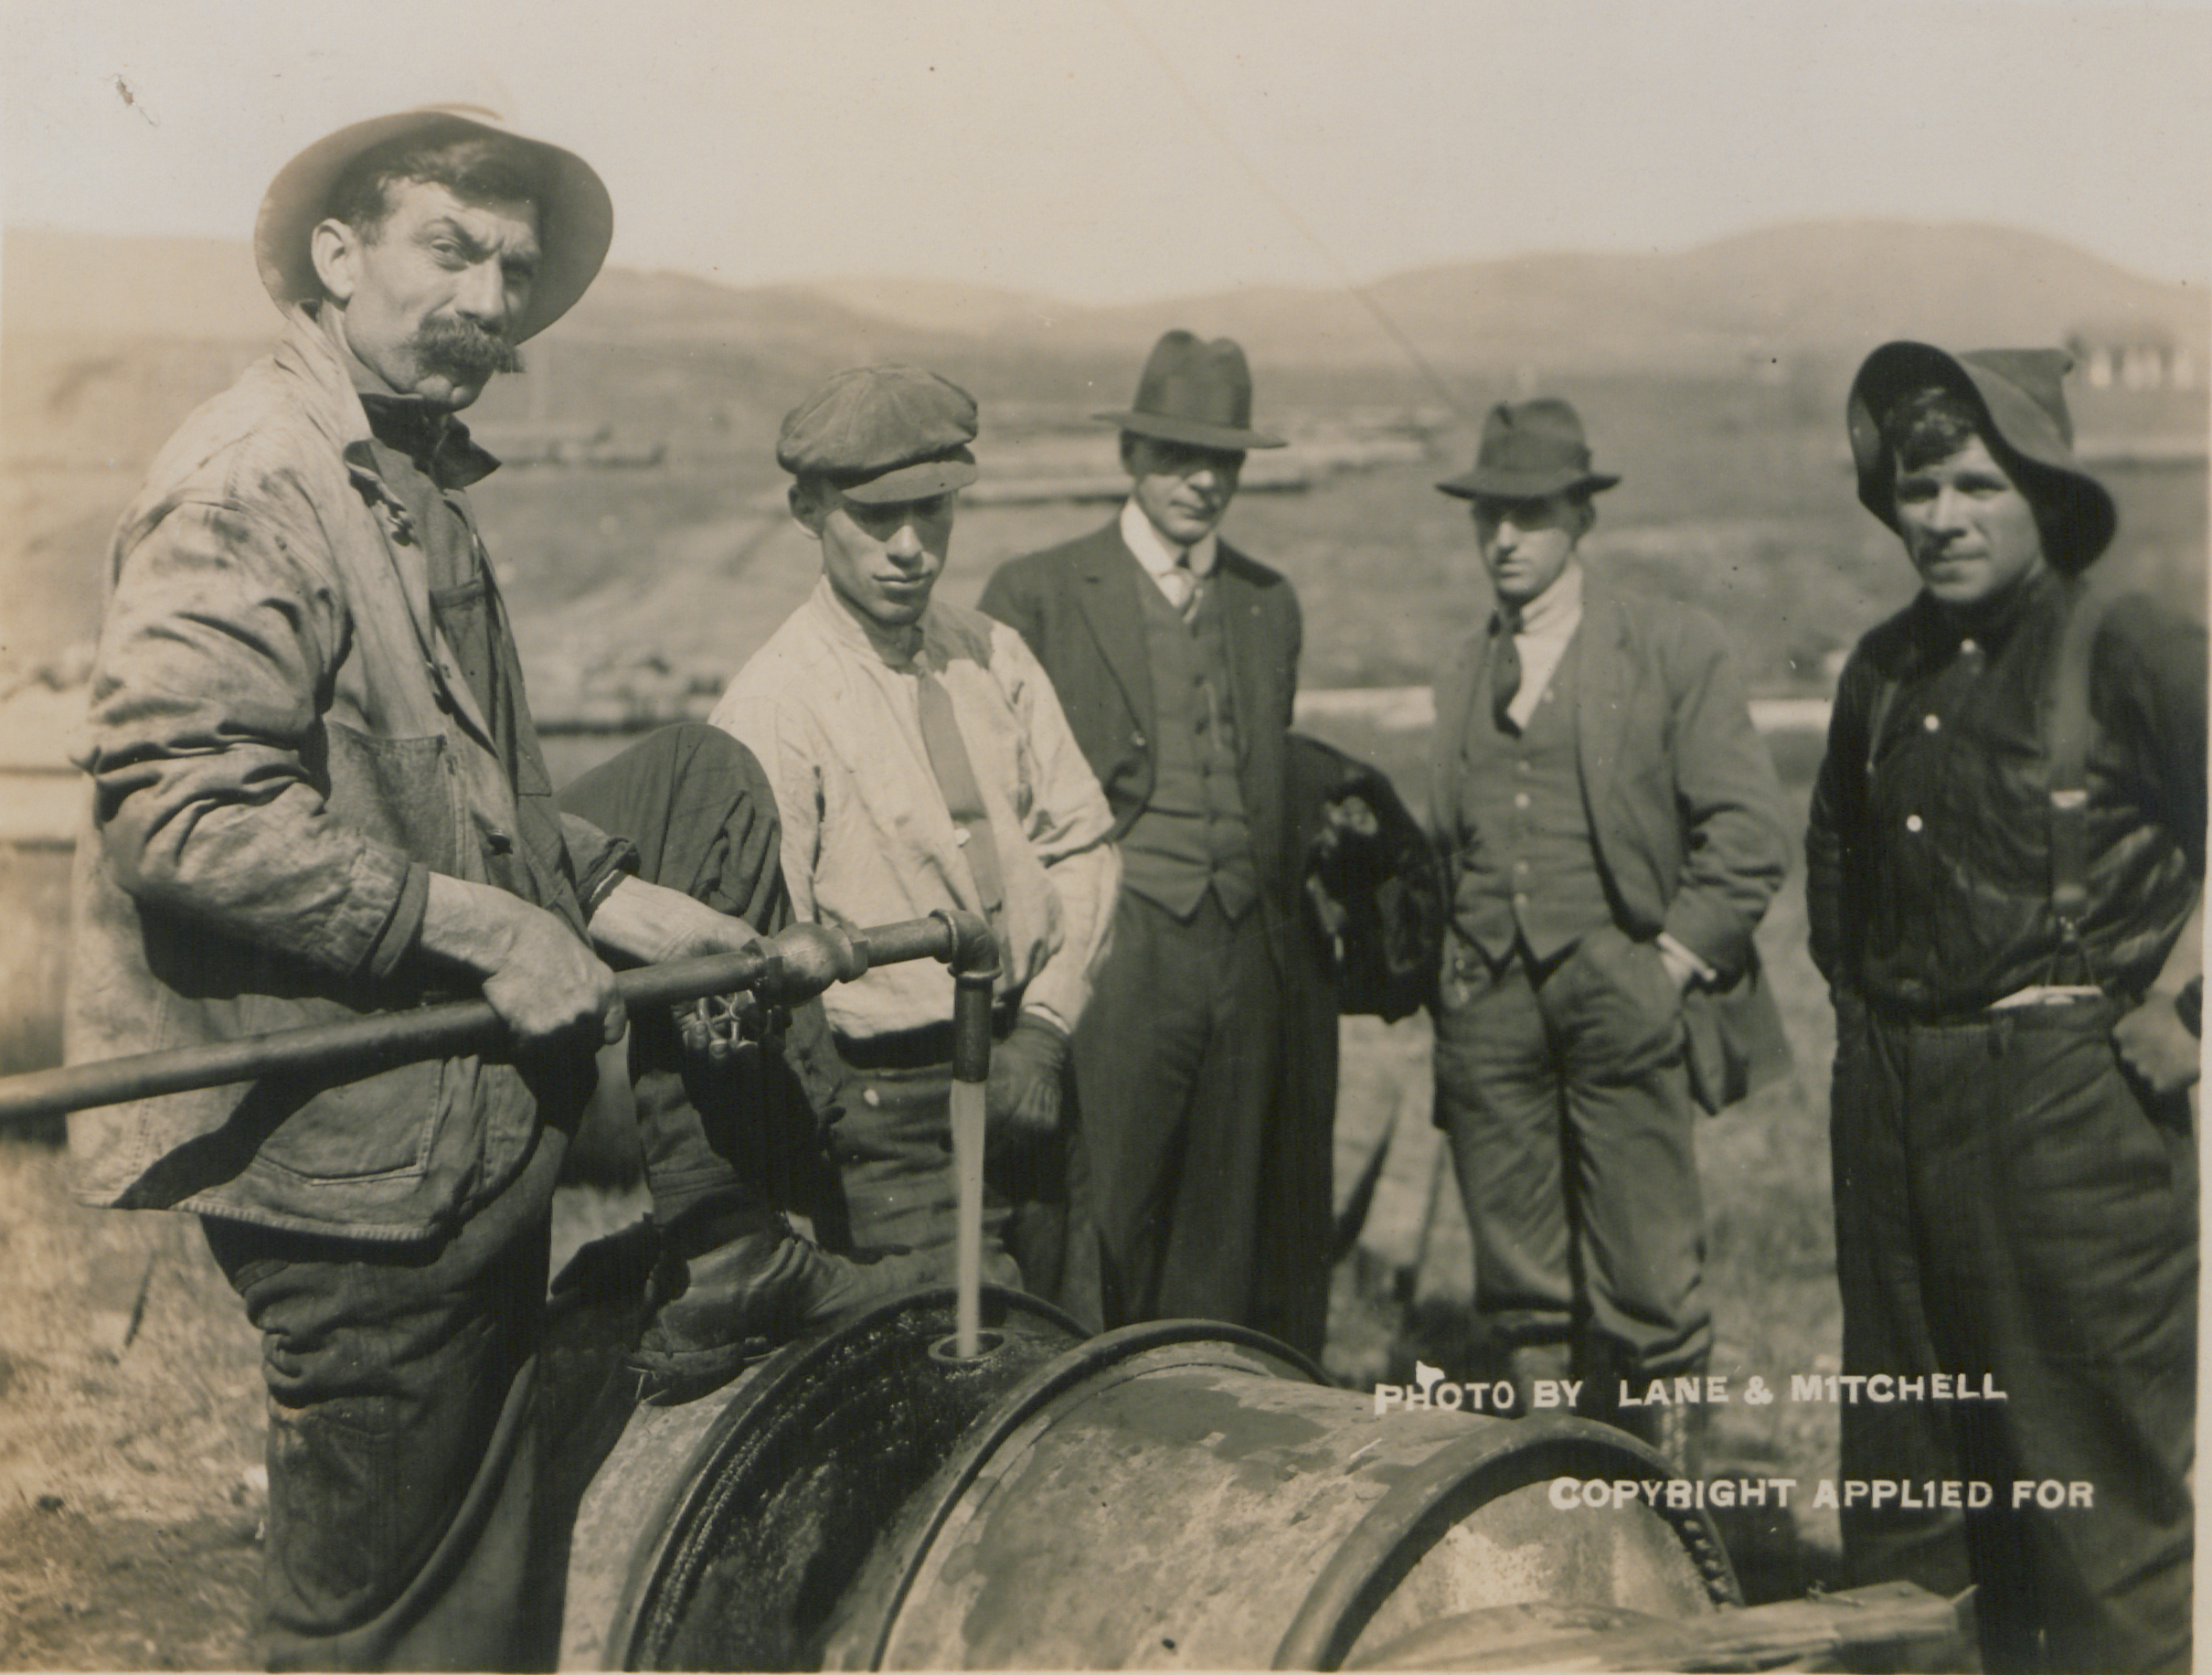 A man feeds oil into a drum using a pipe. Four other men (two working, two in suits) look on.